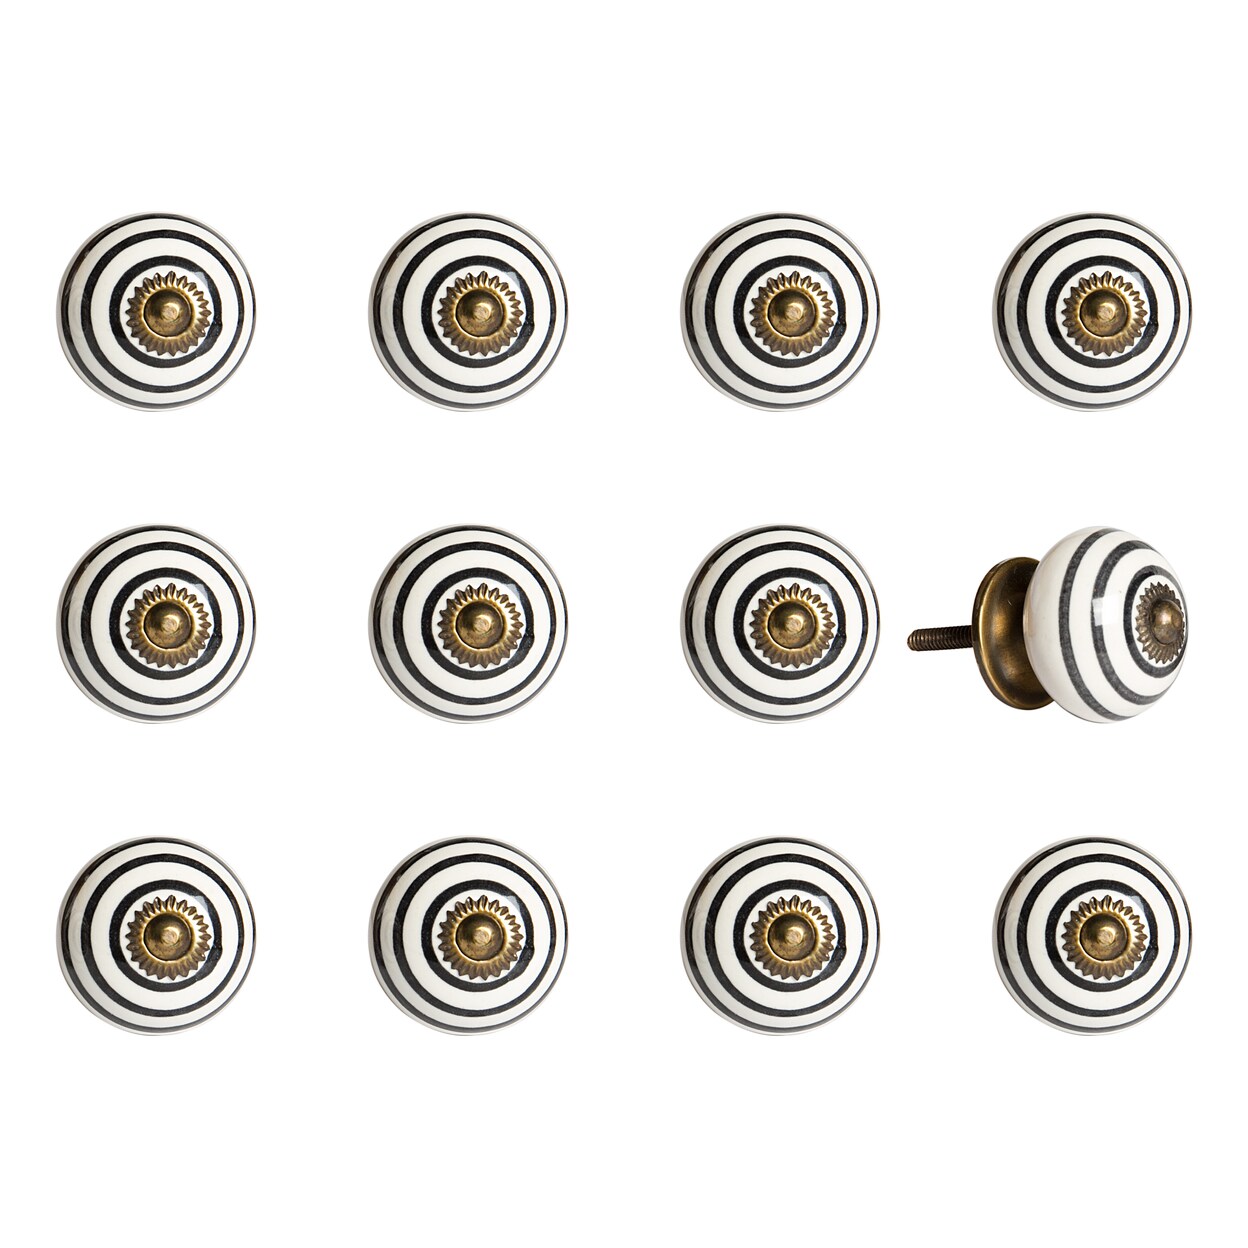 Knob-It    Classic Cabinet and Drawer Knobs  12-Piece  17